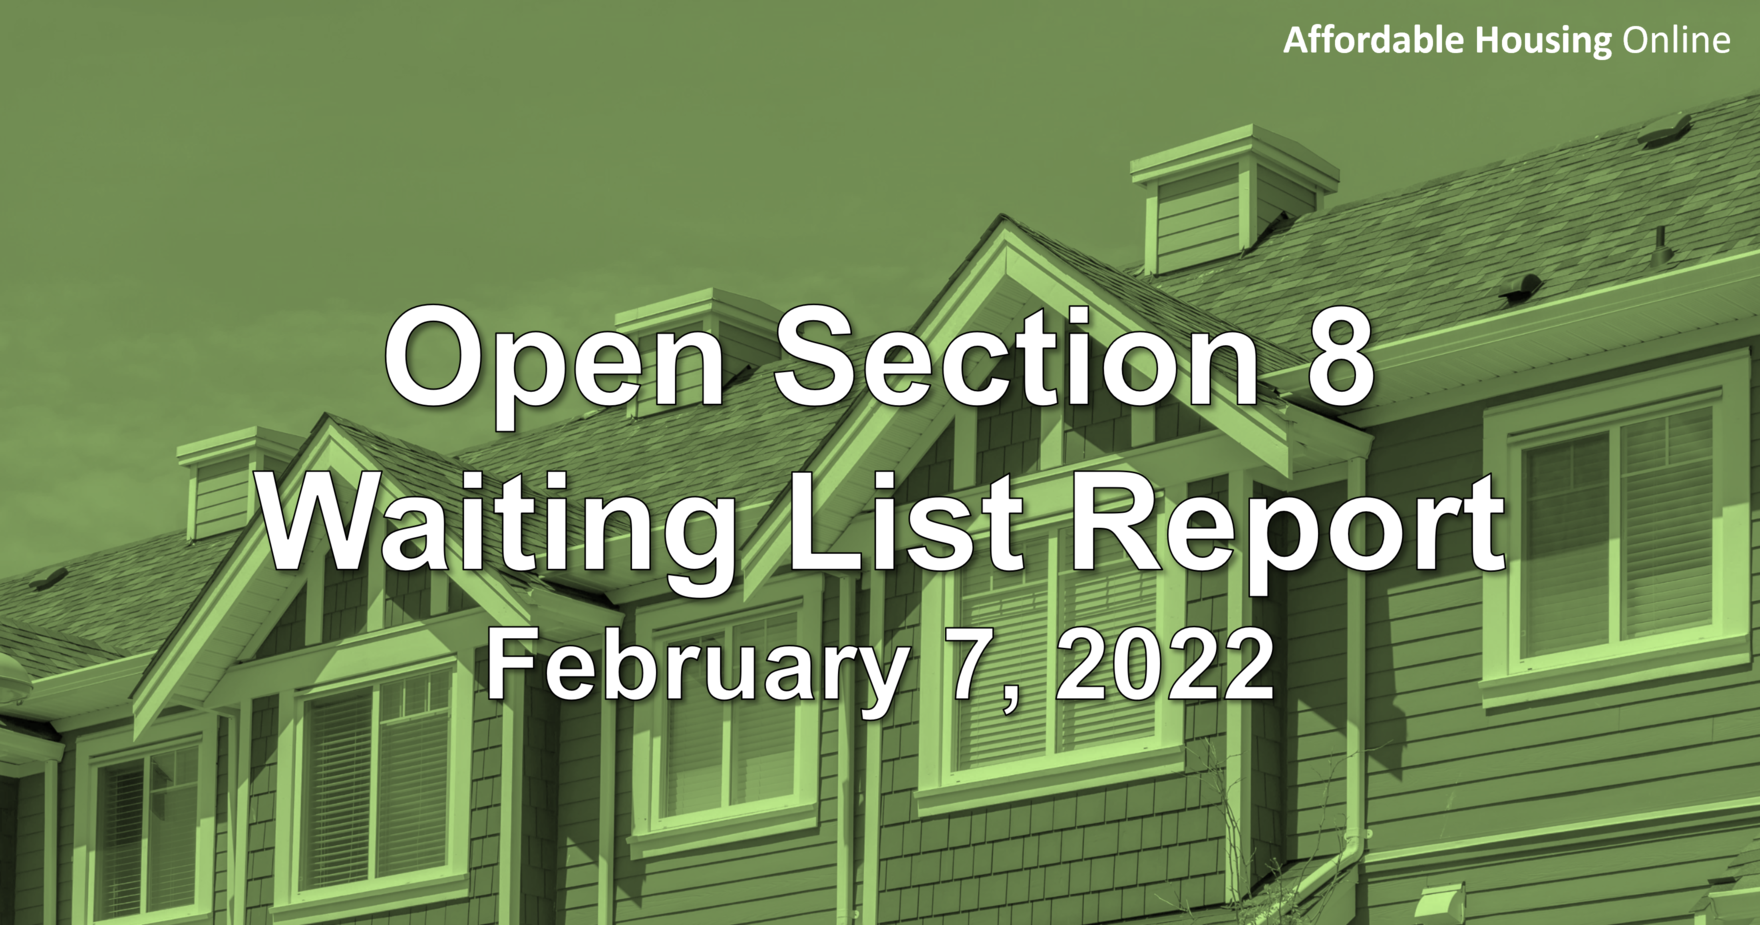 Open Section 8 Waiting List Report: February 7, 2022